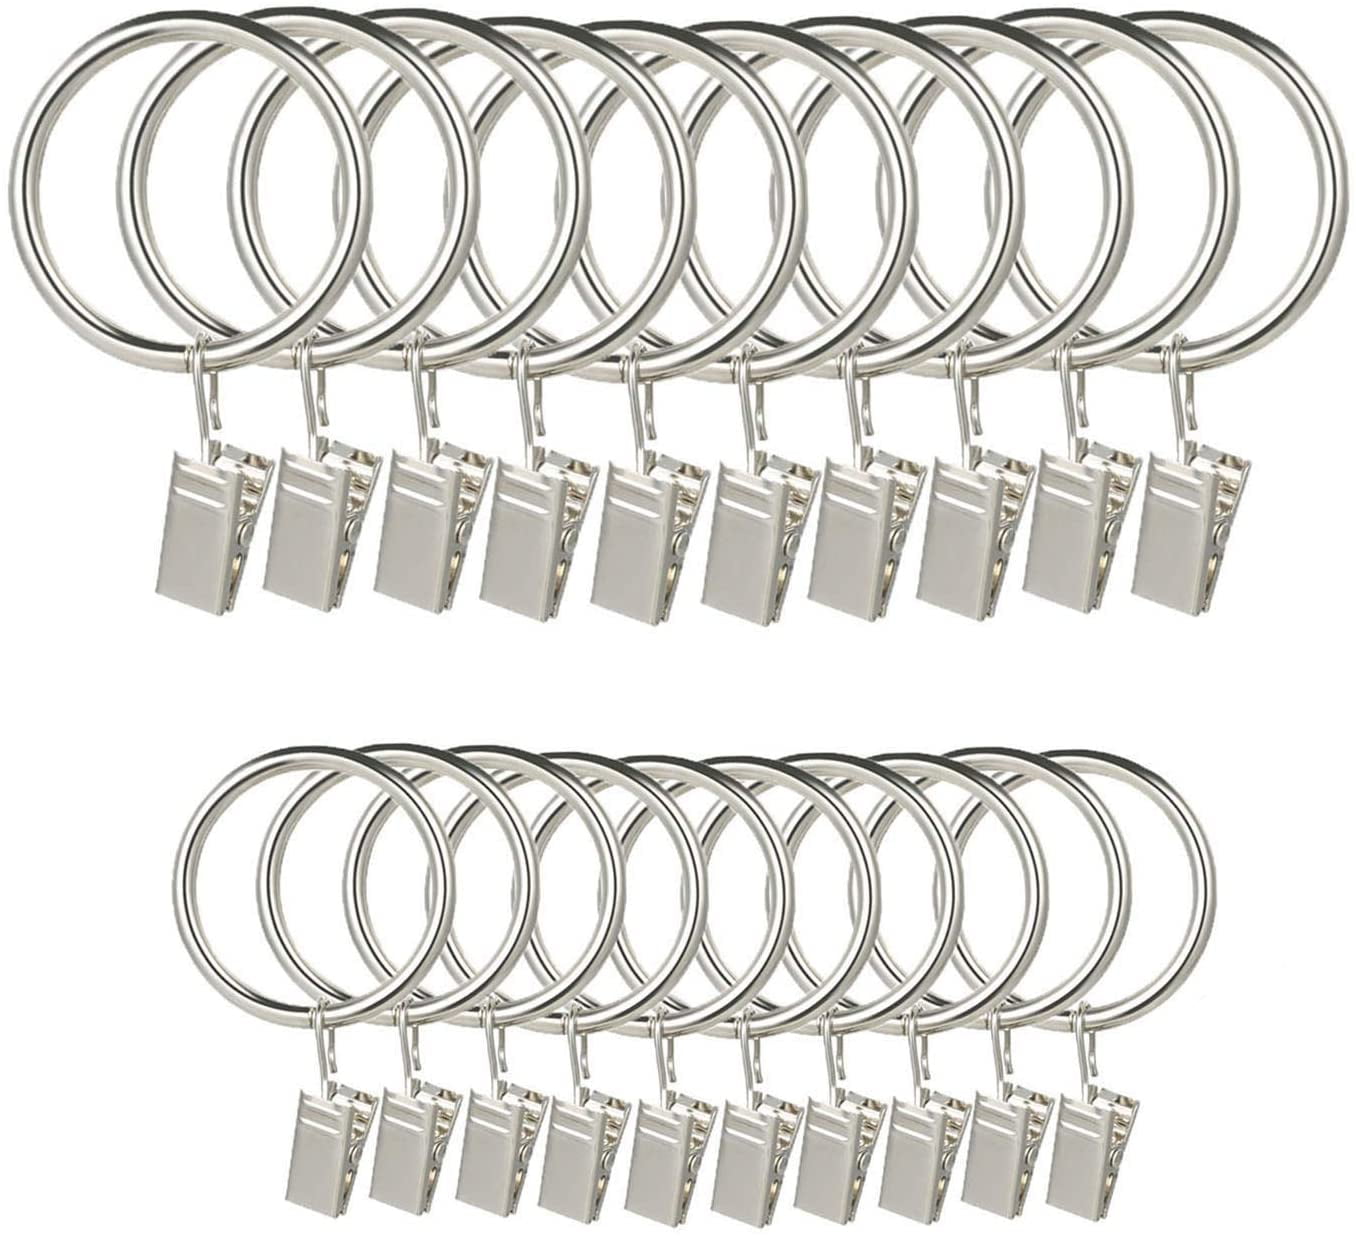 30x Metal Curtain Rings Hook with Clips Eyelets Drapery Voile Net Hanging Wire 